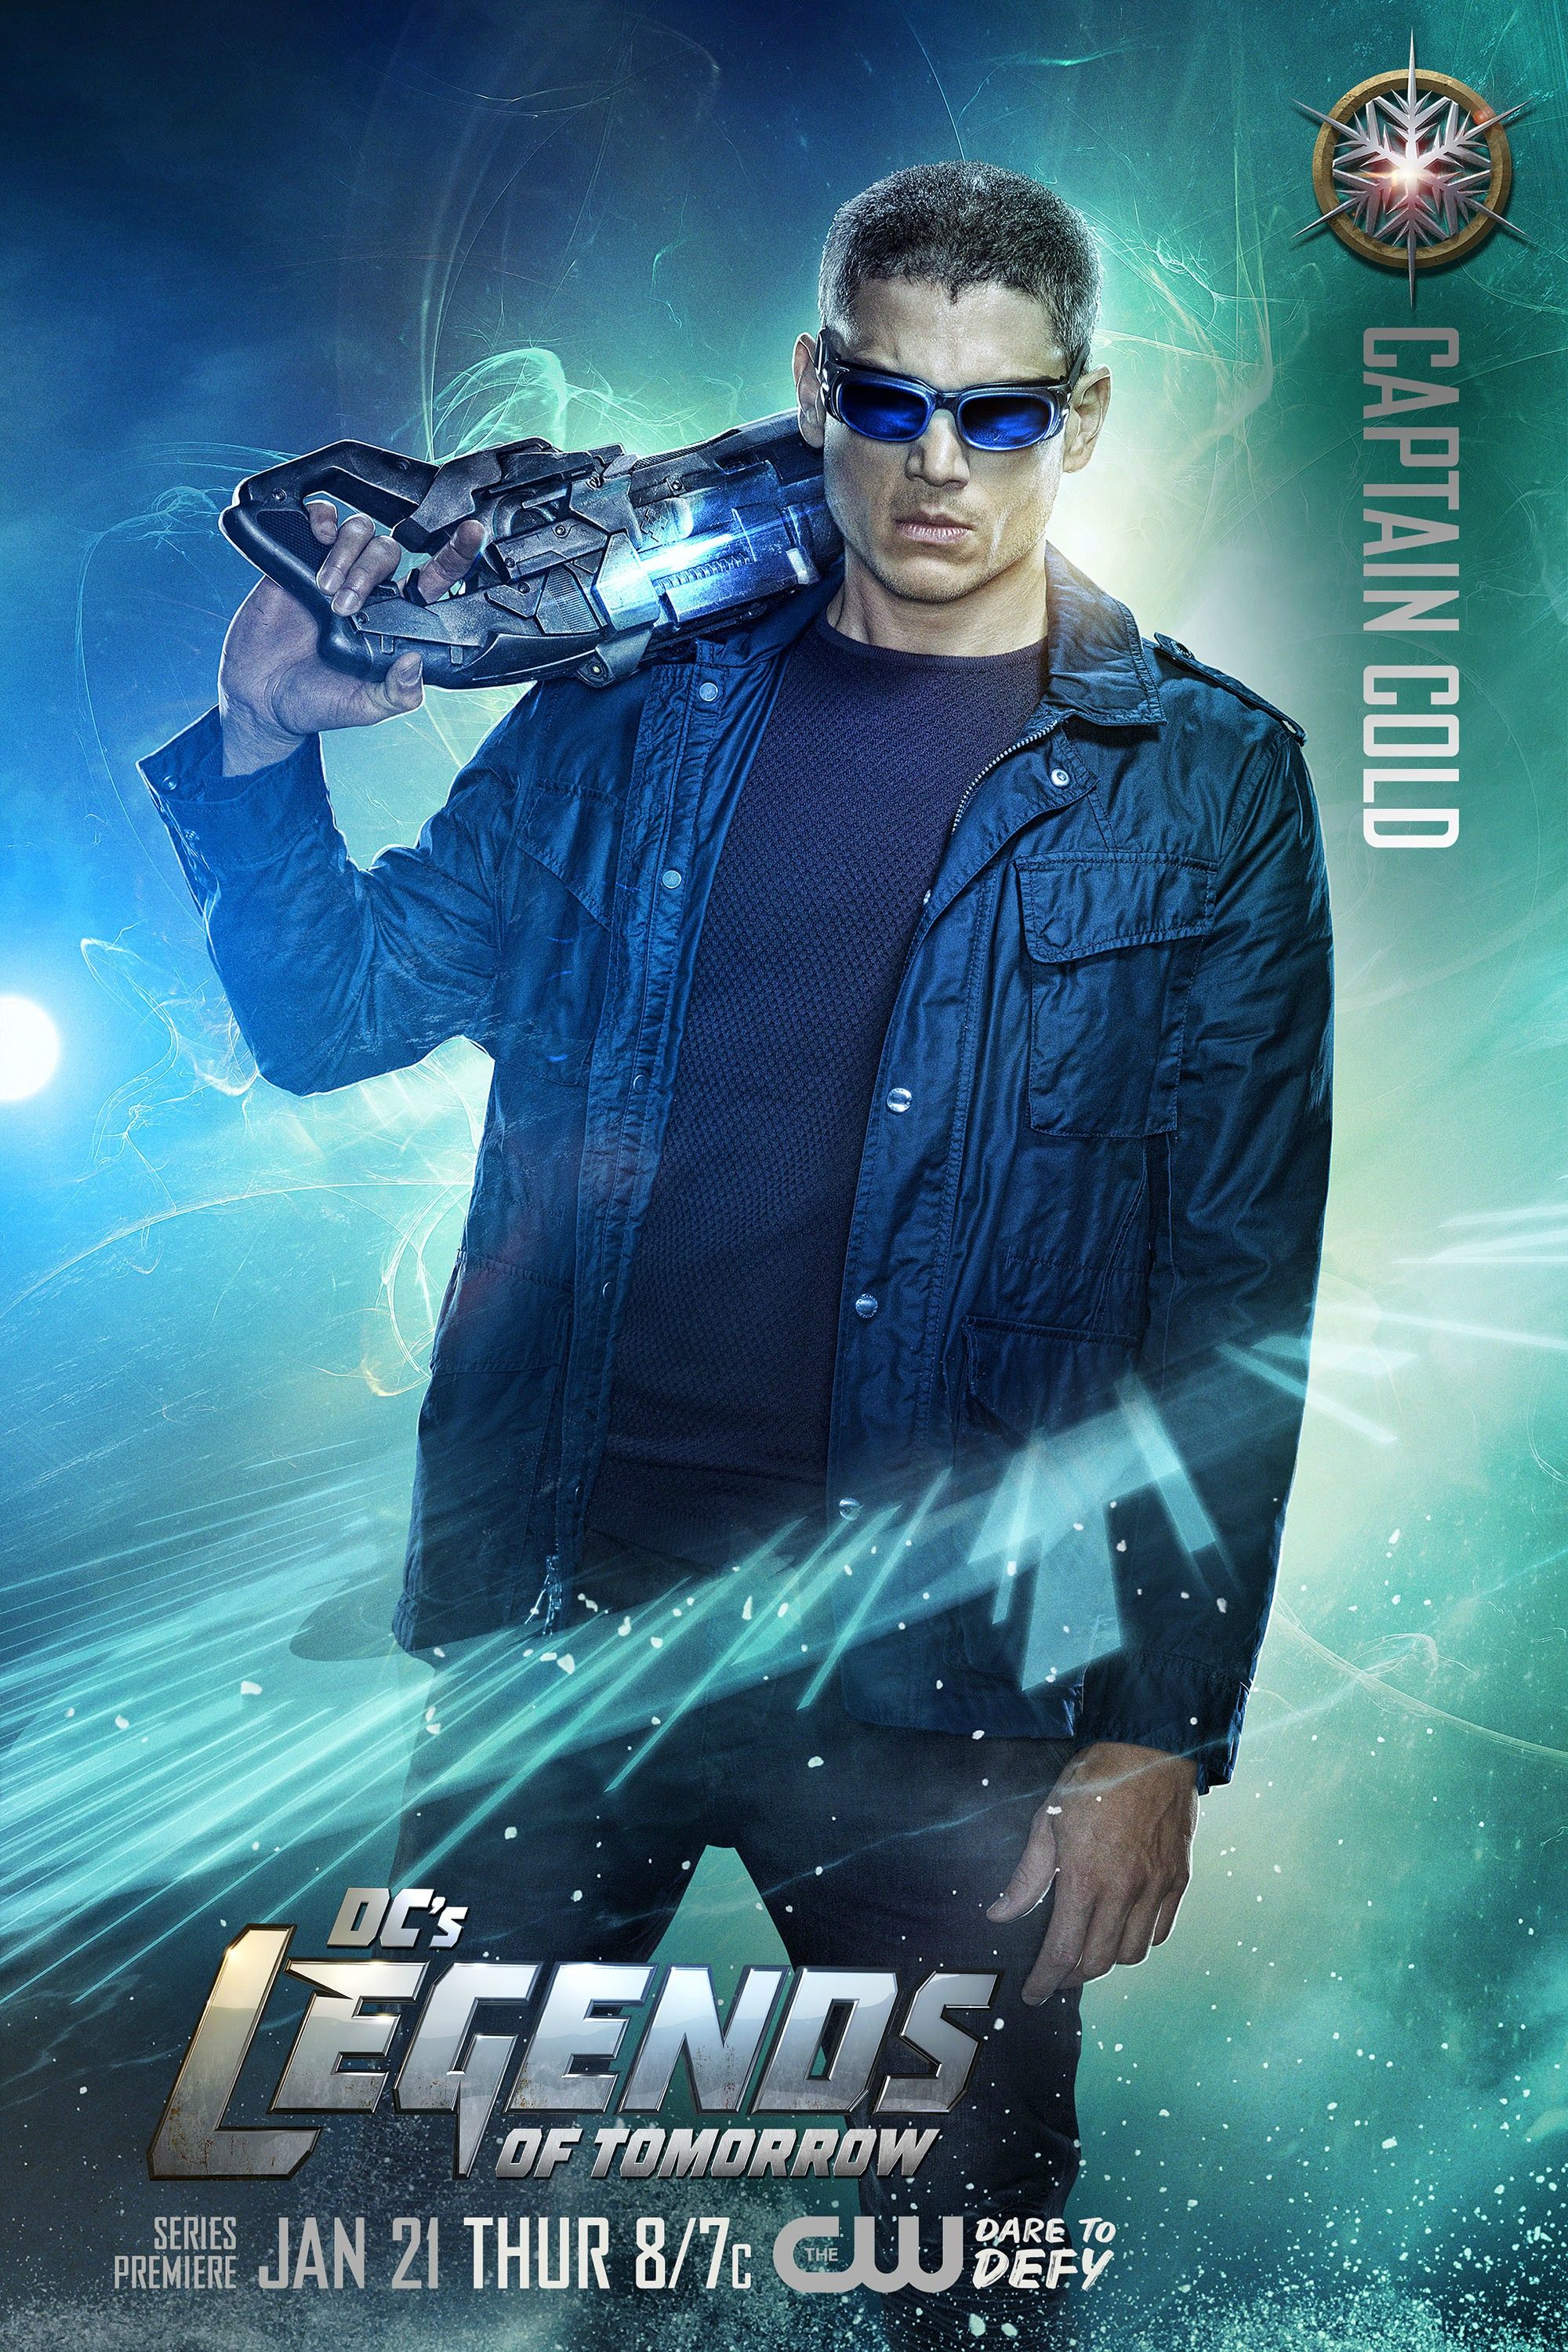 Legends of Tomorrow 2016 Cold wallpaper 2018 in Serials